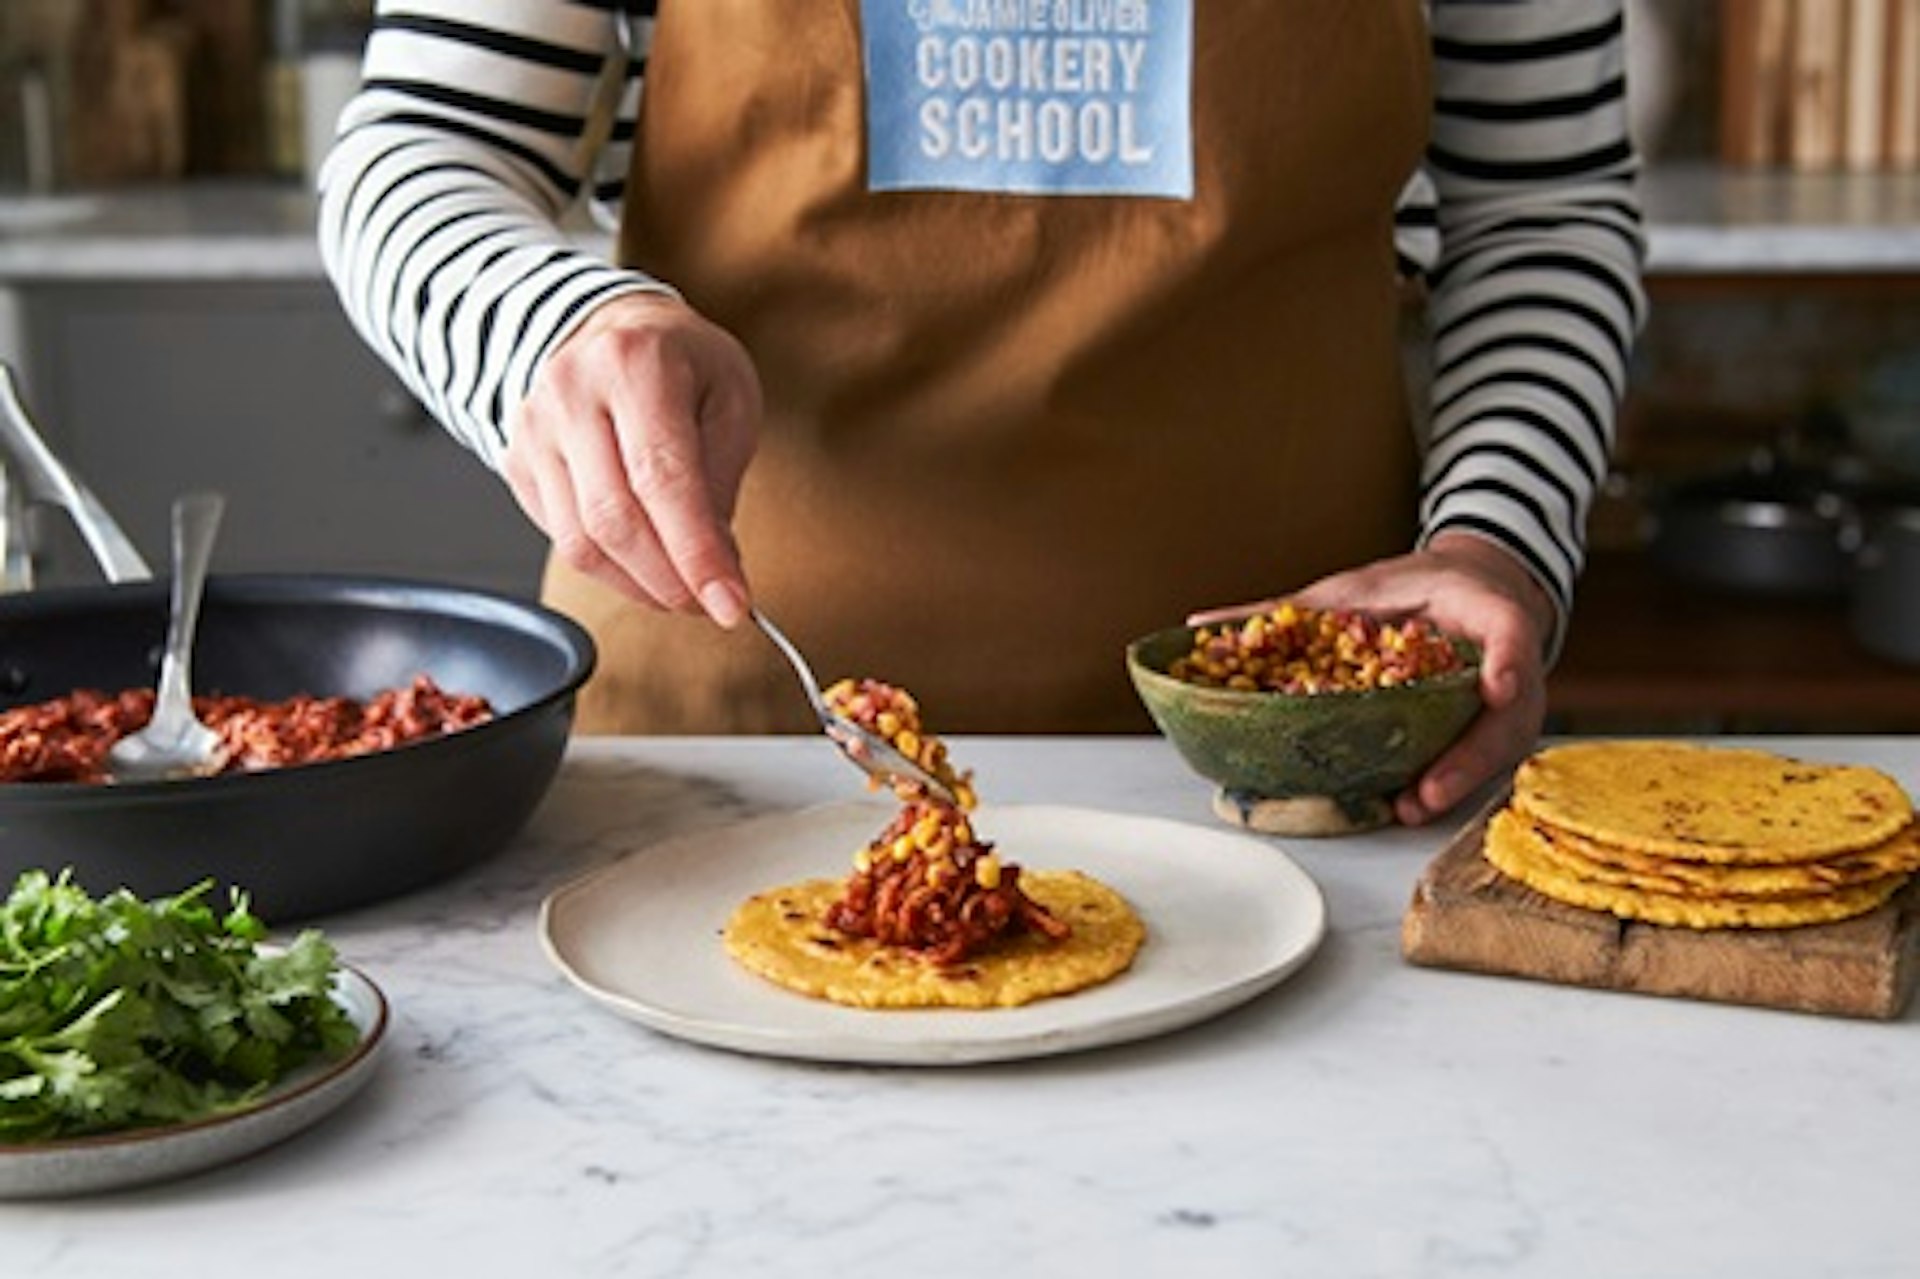 Mexican Street Food Class for Two at Jamie Oliver's Cookery School 1